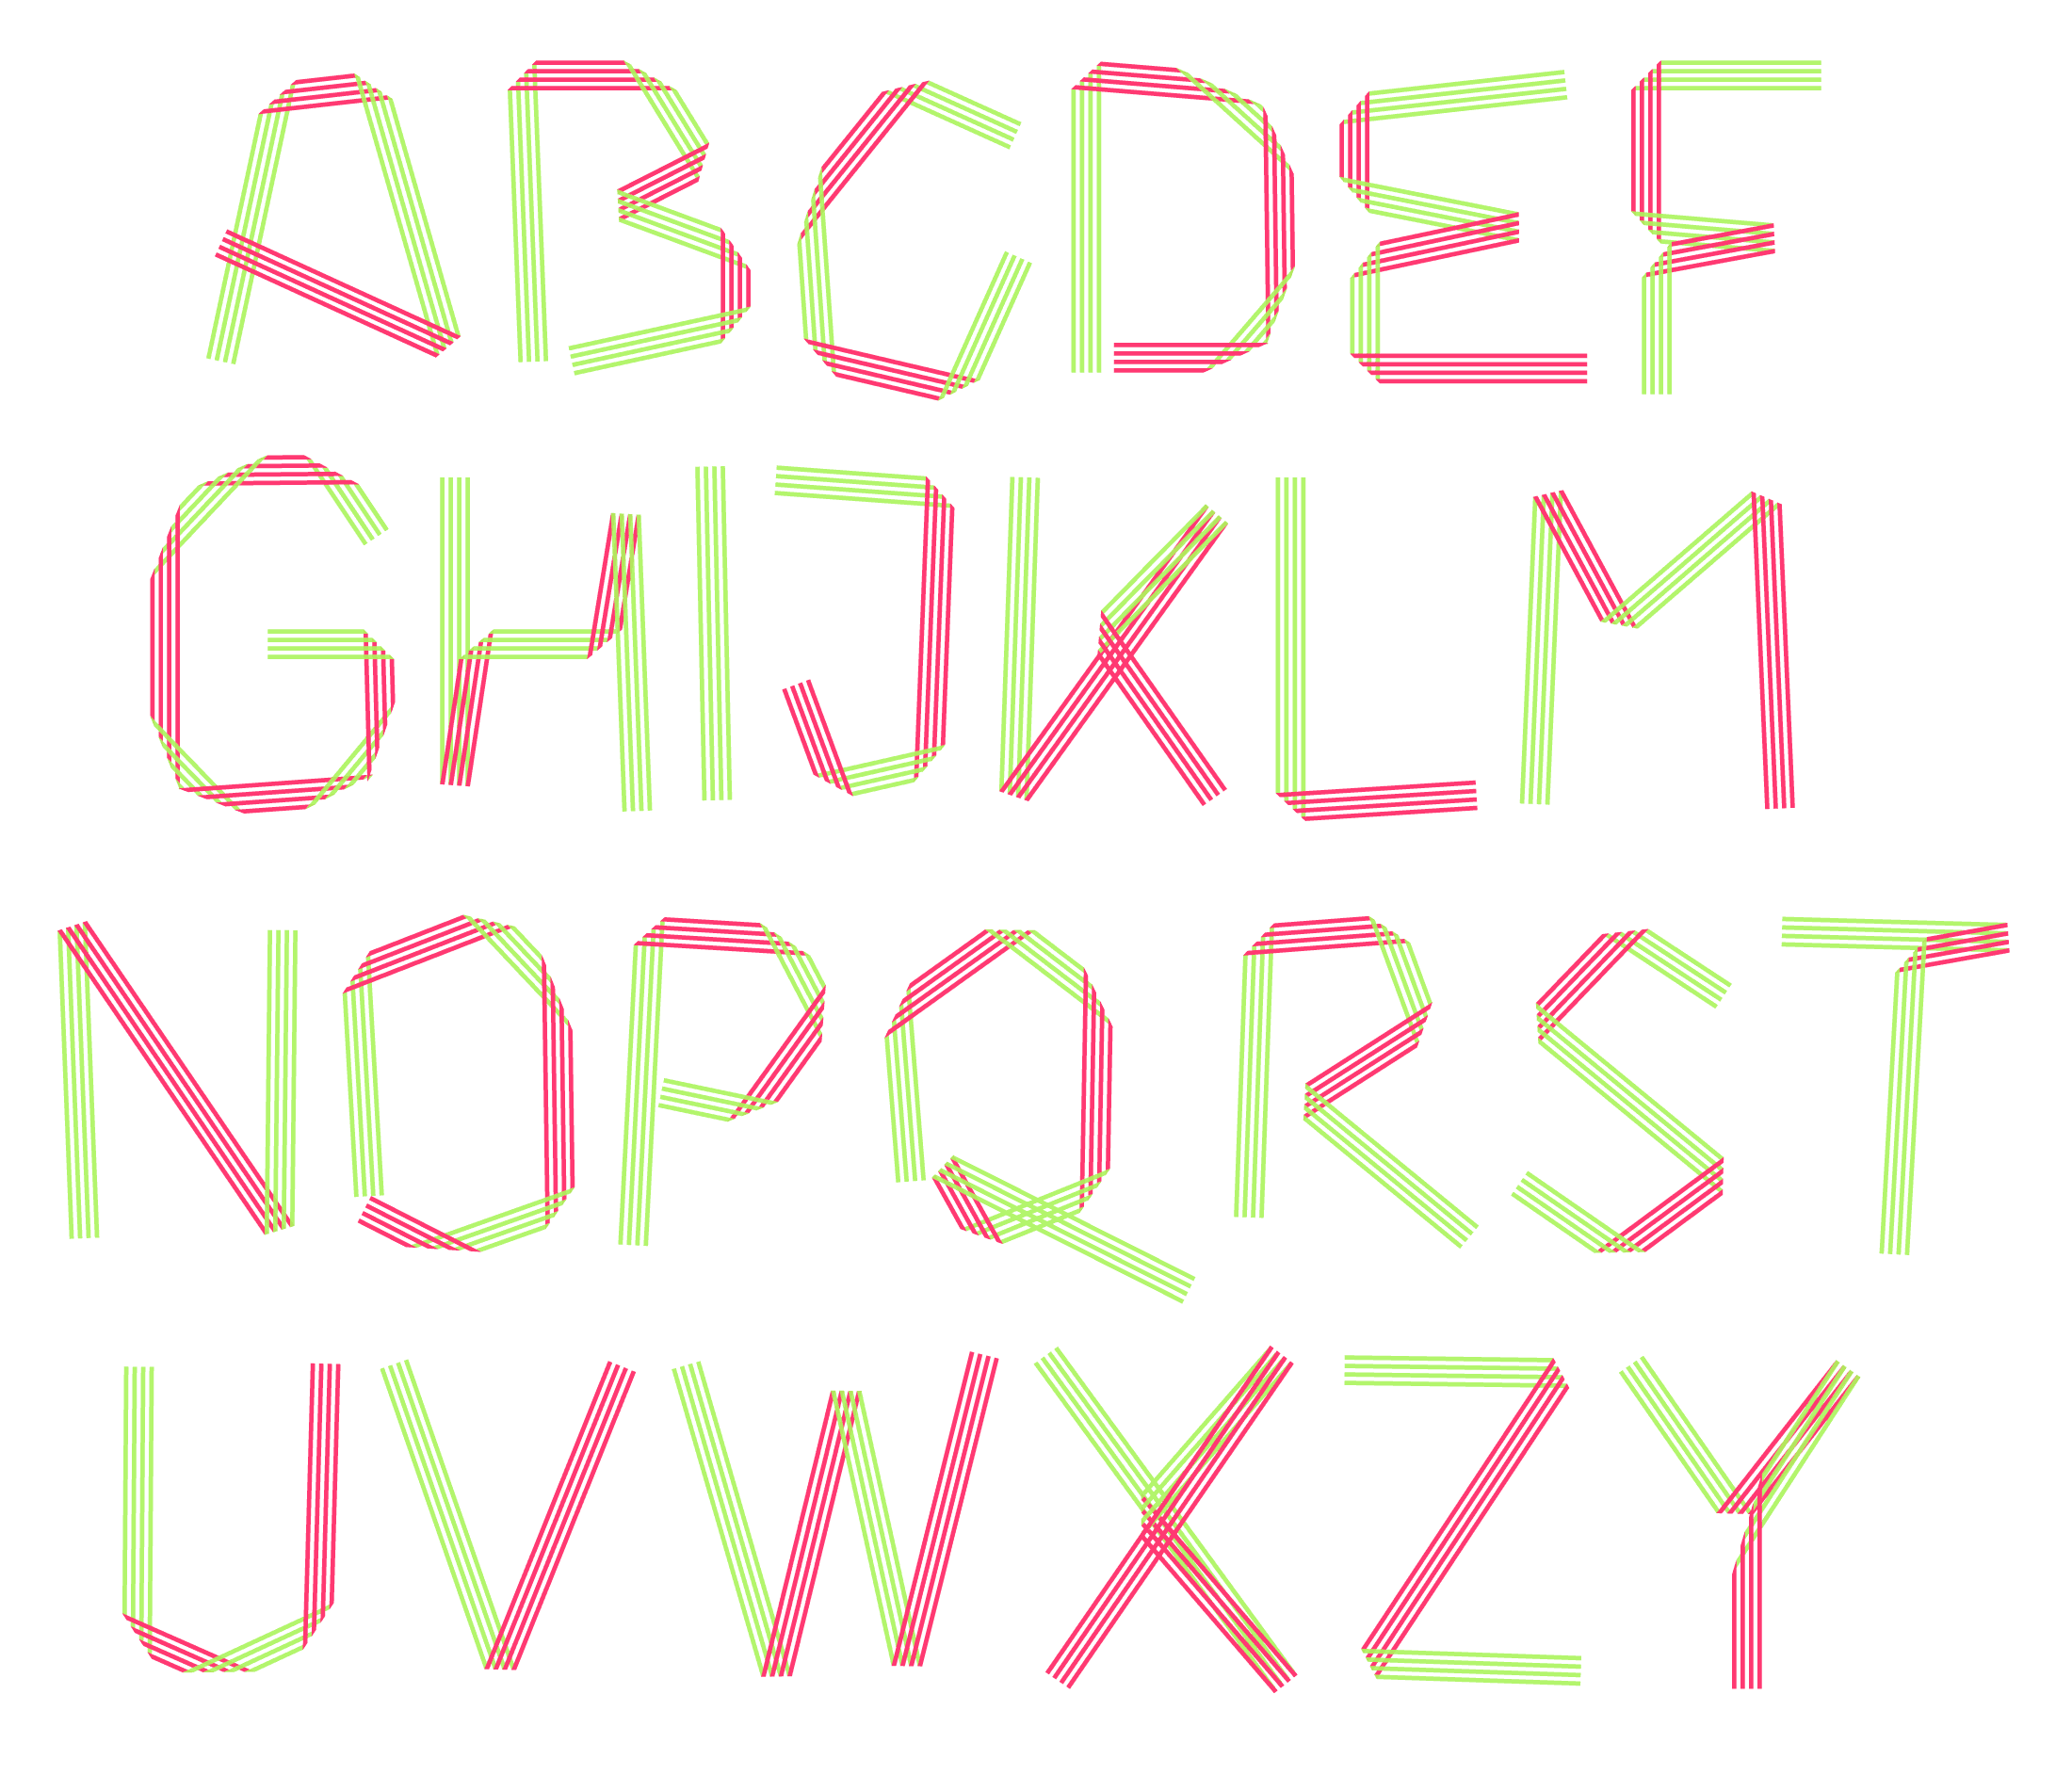 Uppercase set in one of the foldfonts